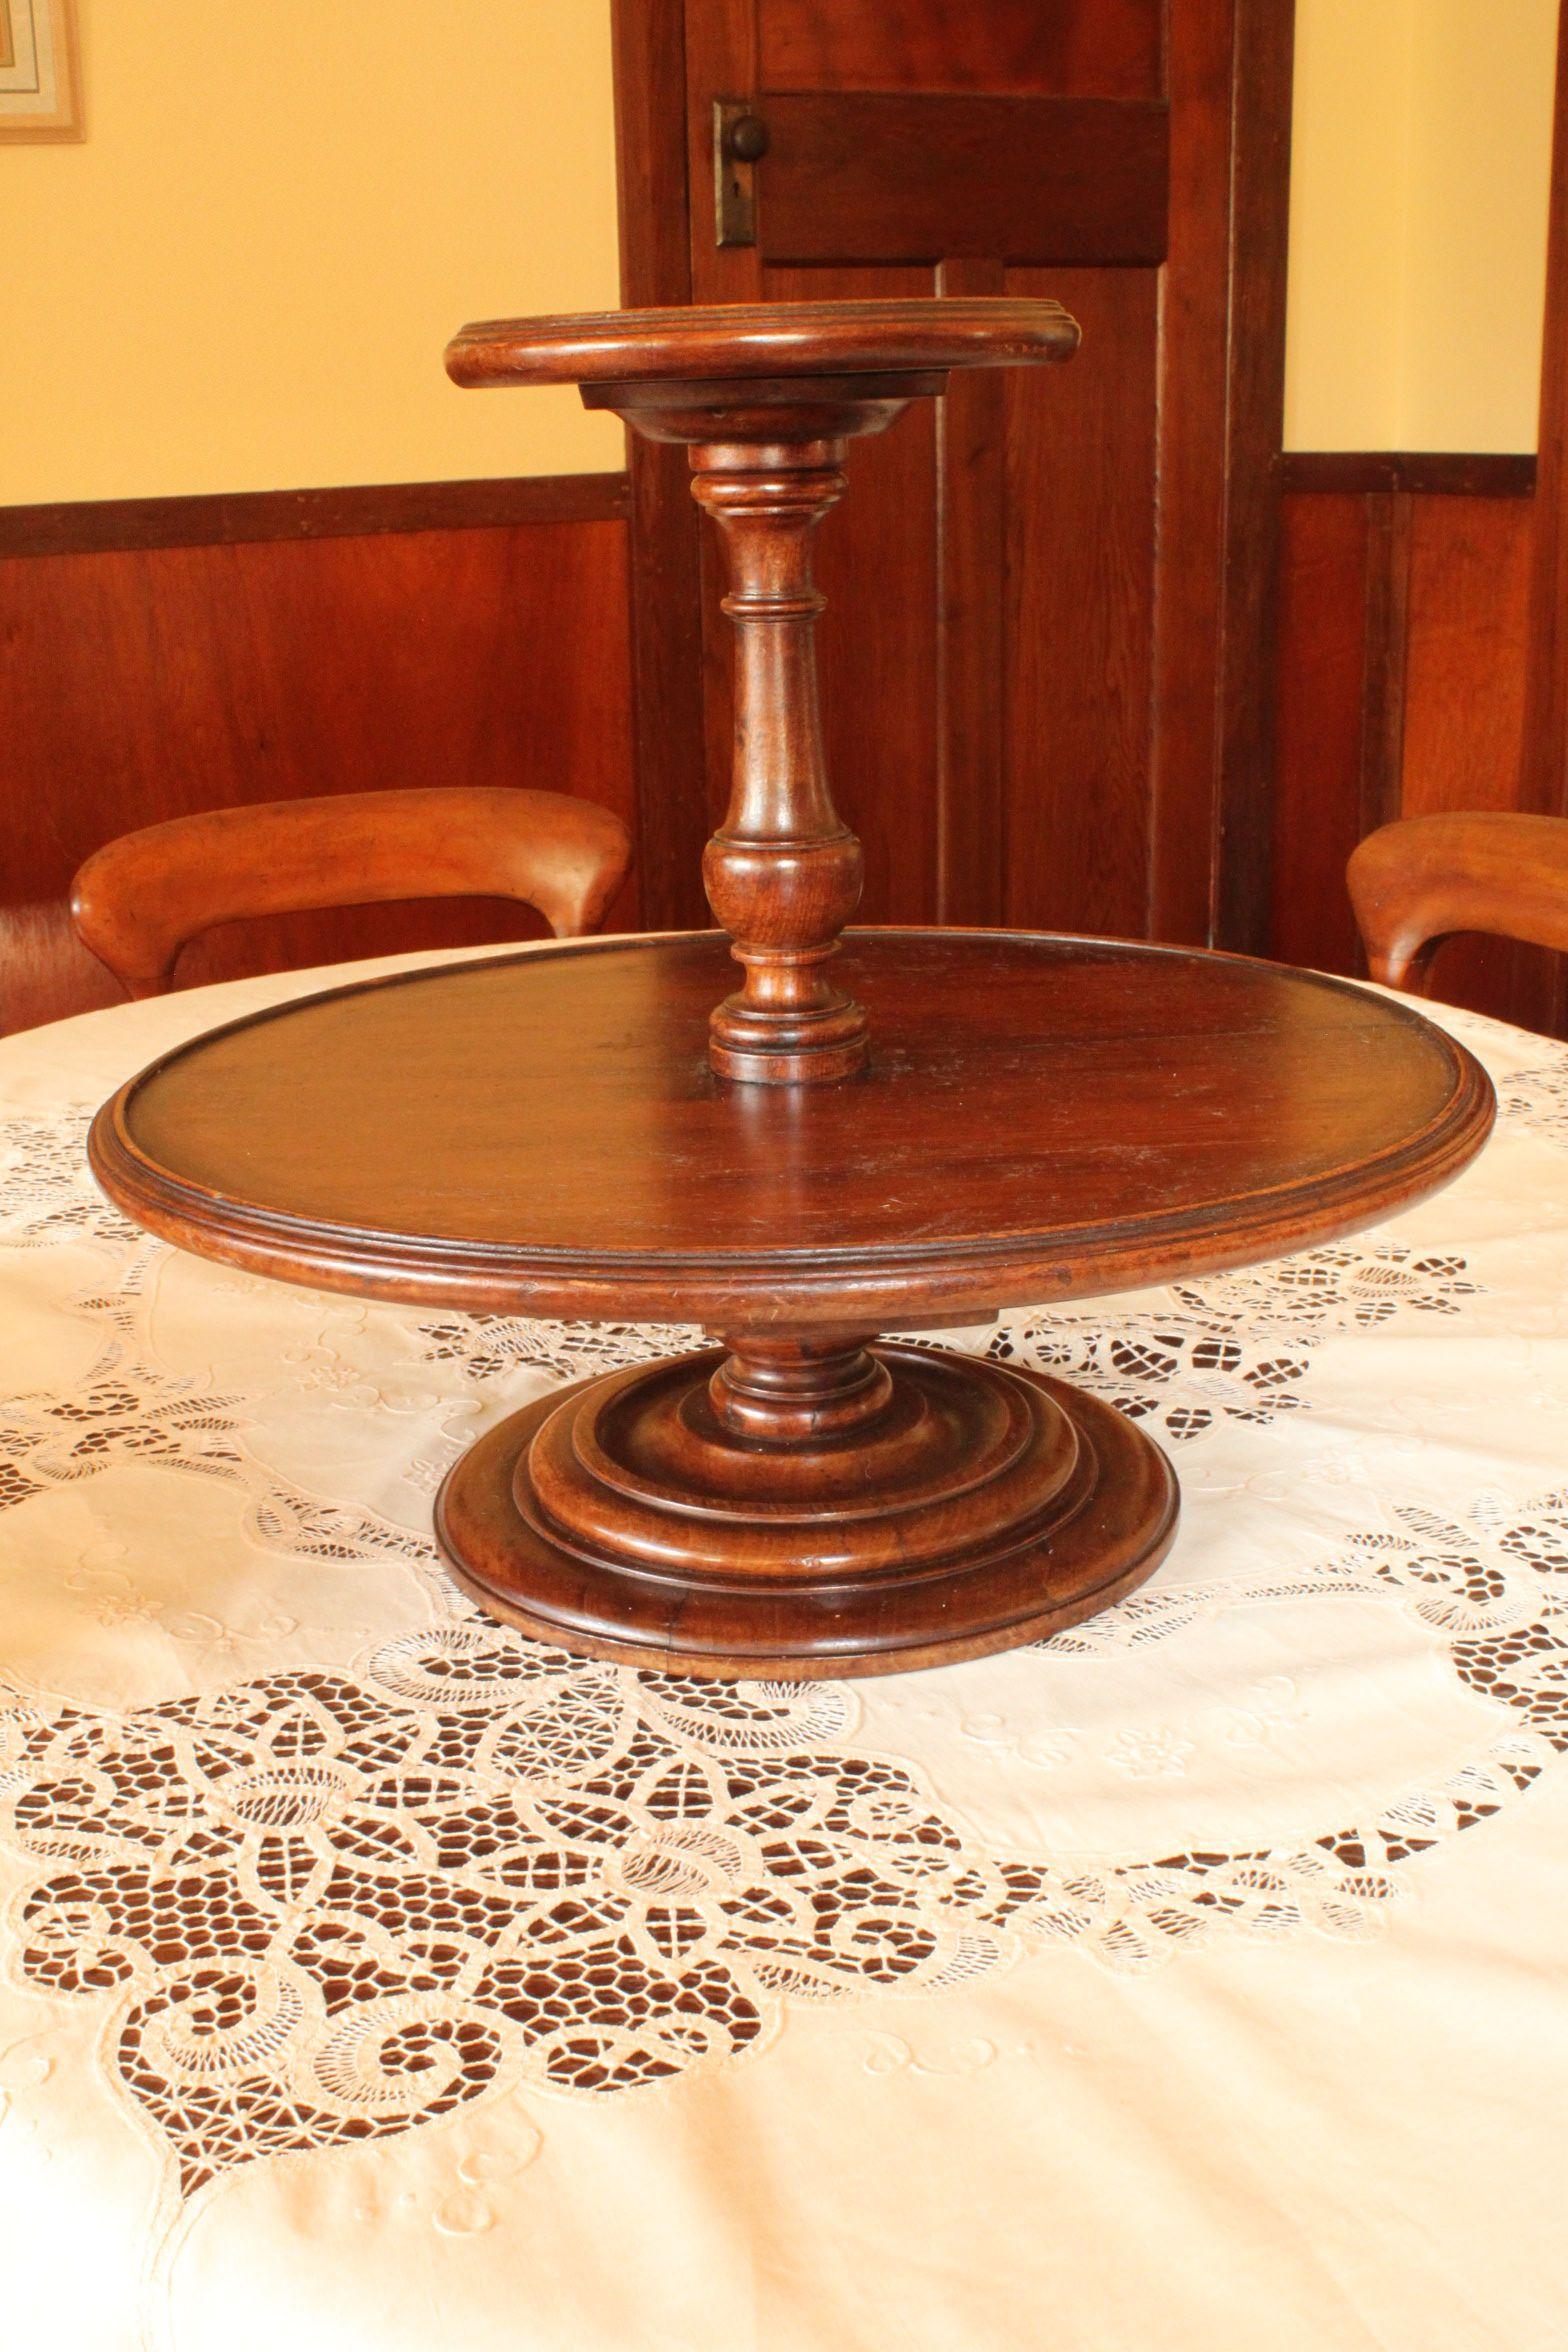 This two tier Lazy Susan is made of mahogany with a diameter of 533 mm (21 inches), and standing 470 mm (18.5 inches) high, resting on a nicely turned, stepped base. It is quite heavy, weighing in at 5.4 kgs (just under 12 pounds). A Lazy Susan